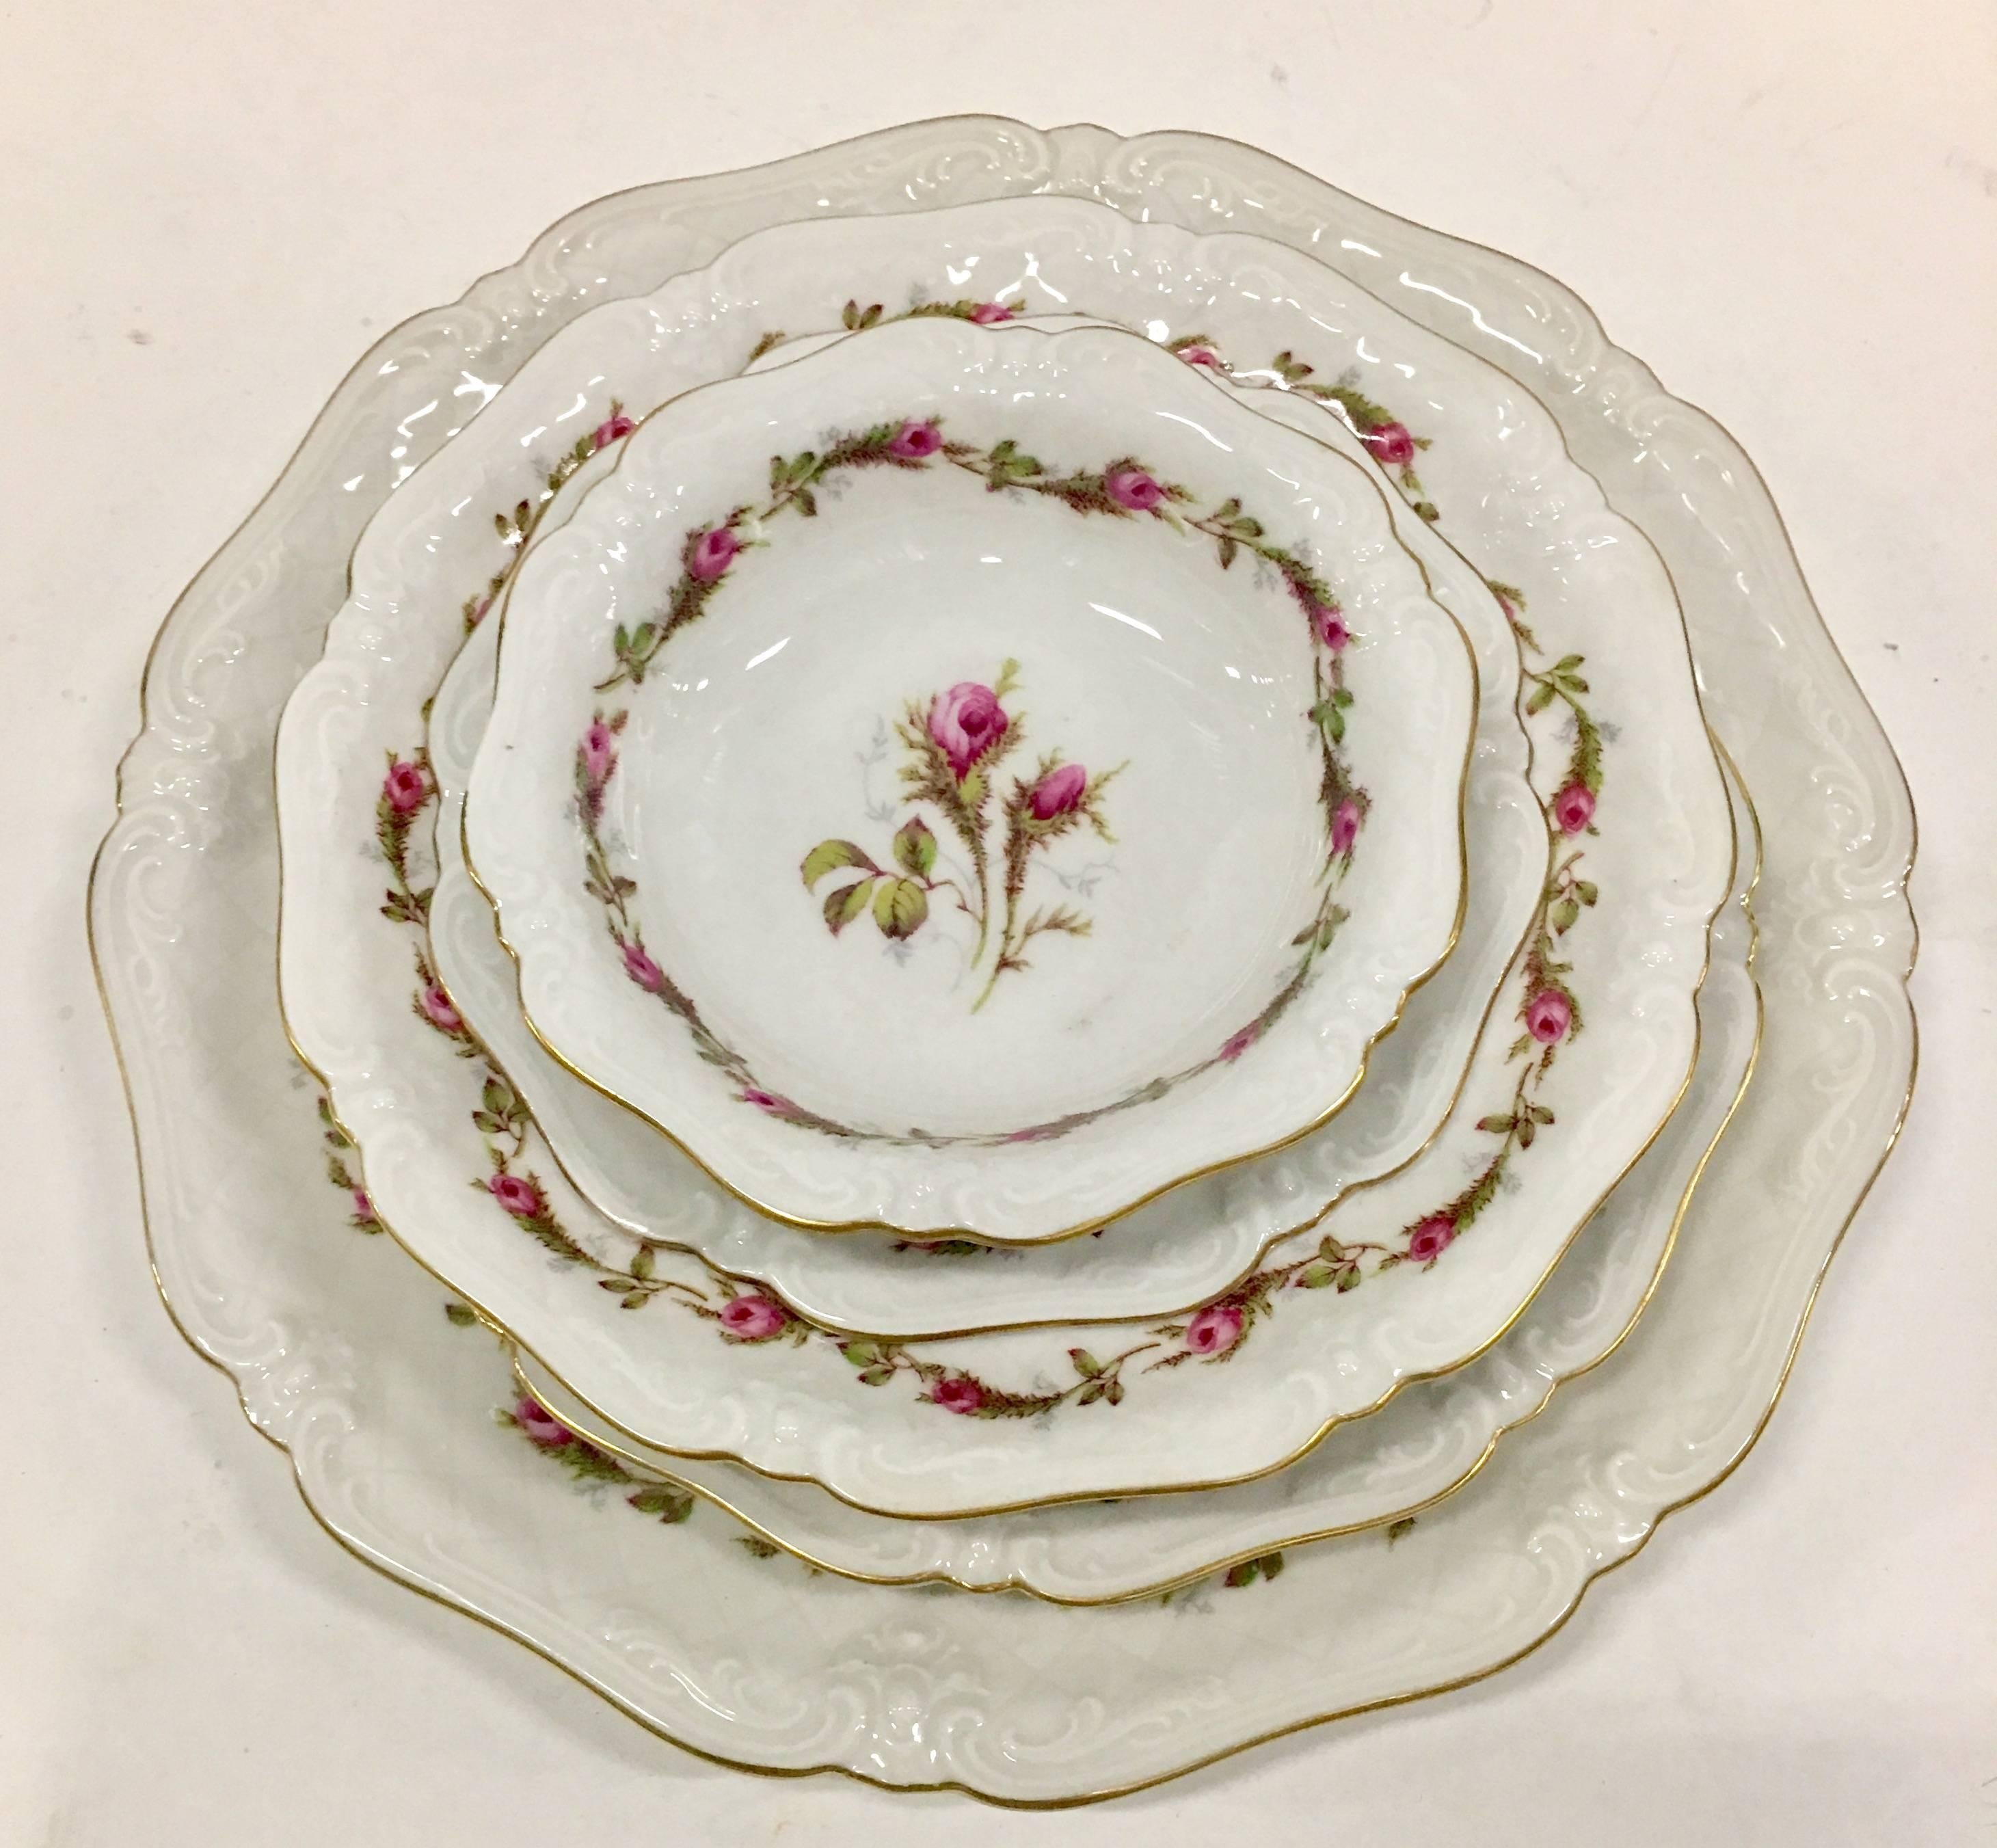 Vintage Bavaria porcelain thirty five piece set of "Moss Rose" or "La Reine Meiss" porcelain china by, Eschenbach Bavaria Germany. Pattern features a white ground with bright pink and green moss rose pattern and 22-karat gold